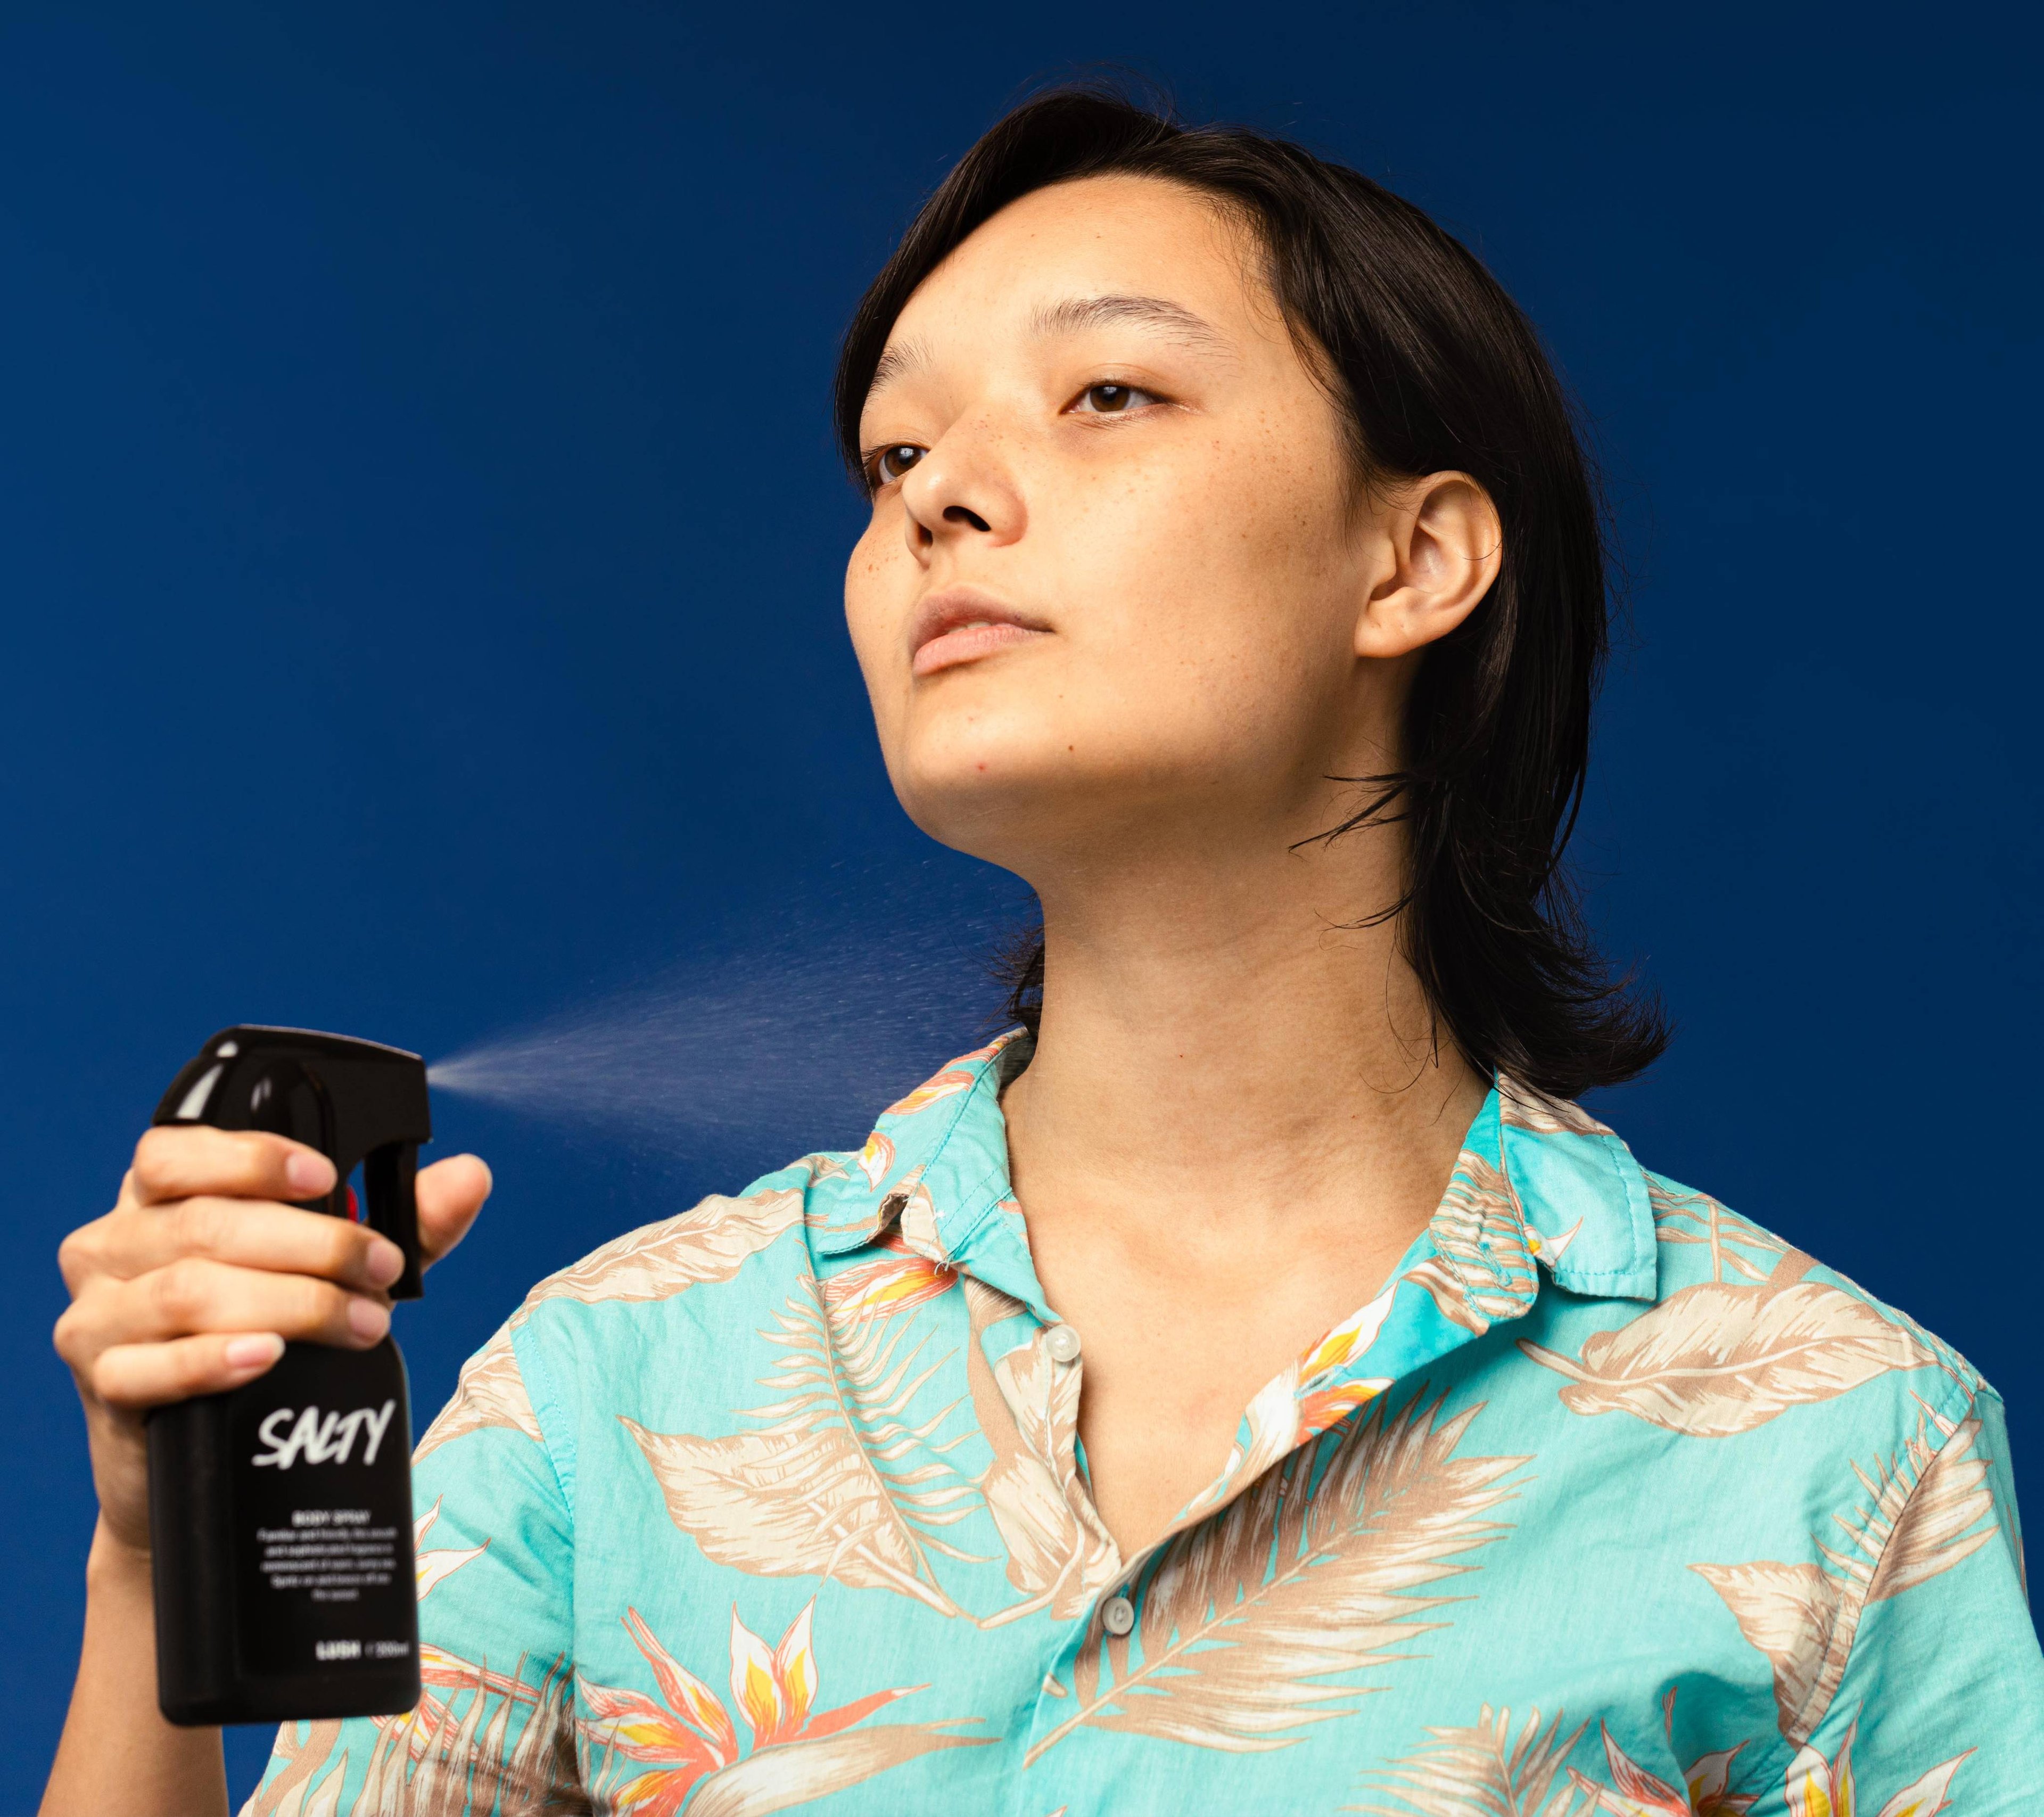 A person wearing a summery shirt sprays Salty body spray onto their neck and chest, looking blissed out and carefree.